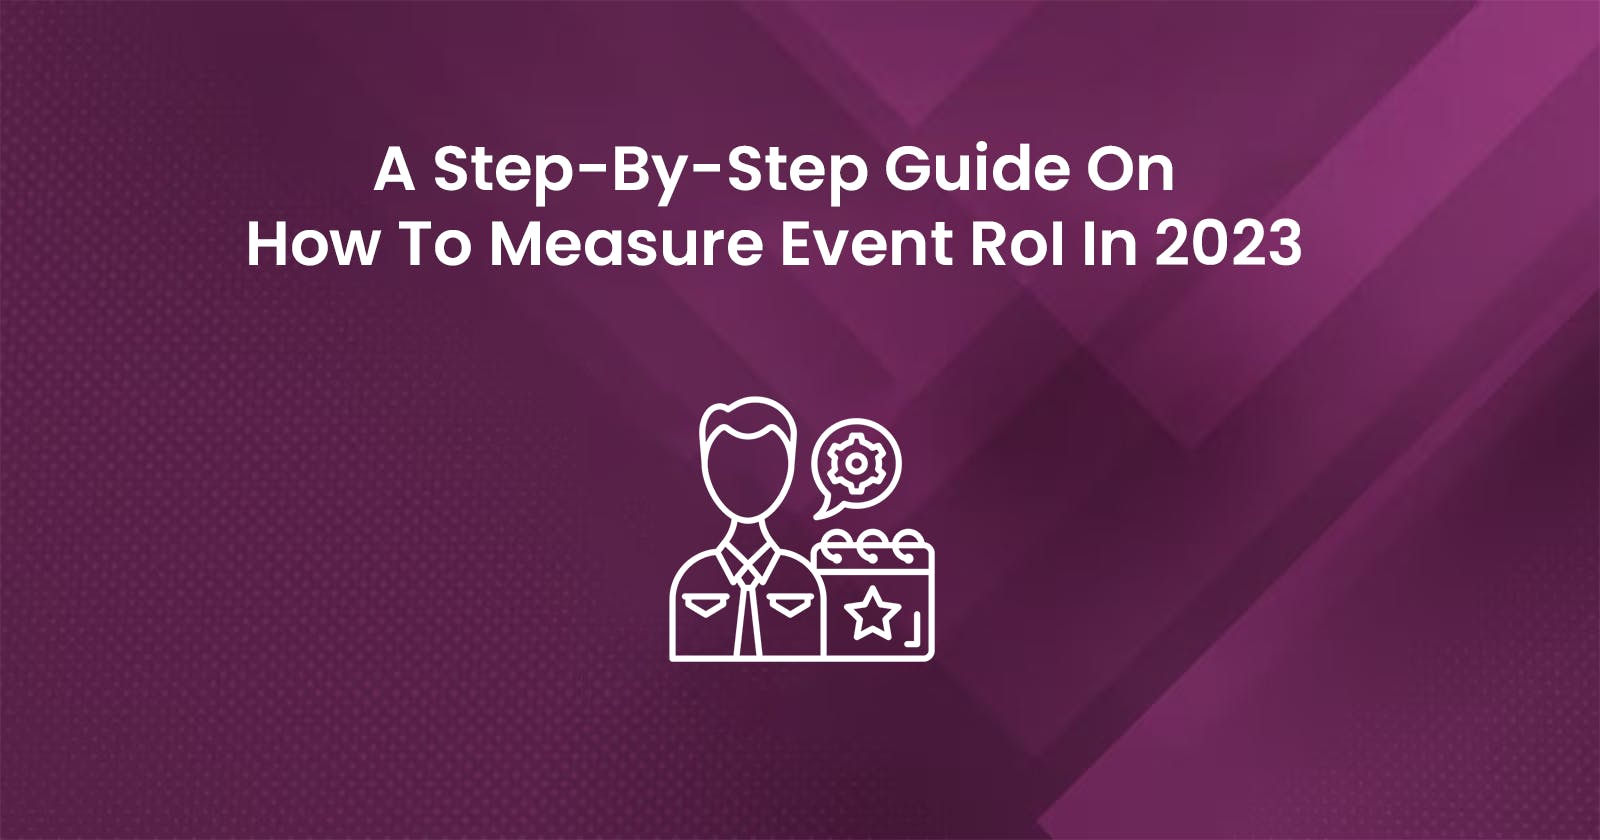 A Step-By-Step Guide On How To Measure Event RoI In 2023